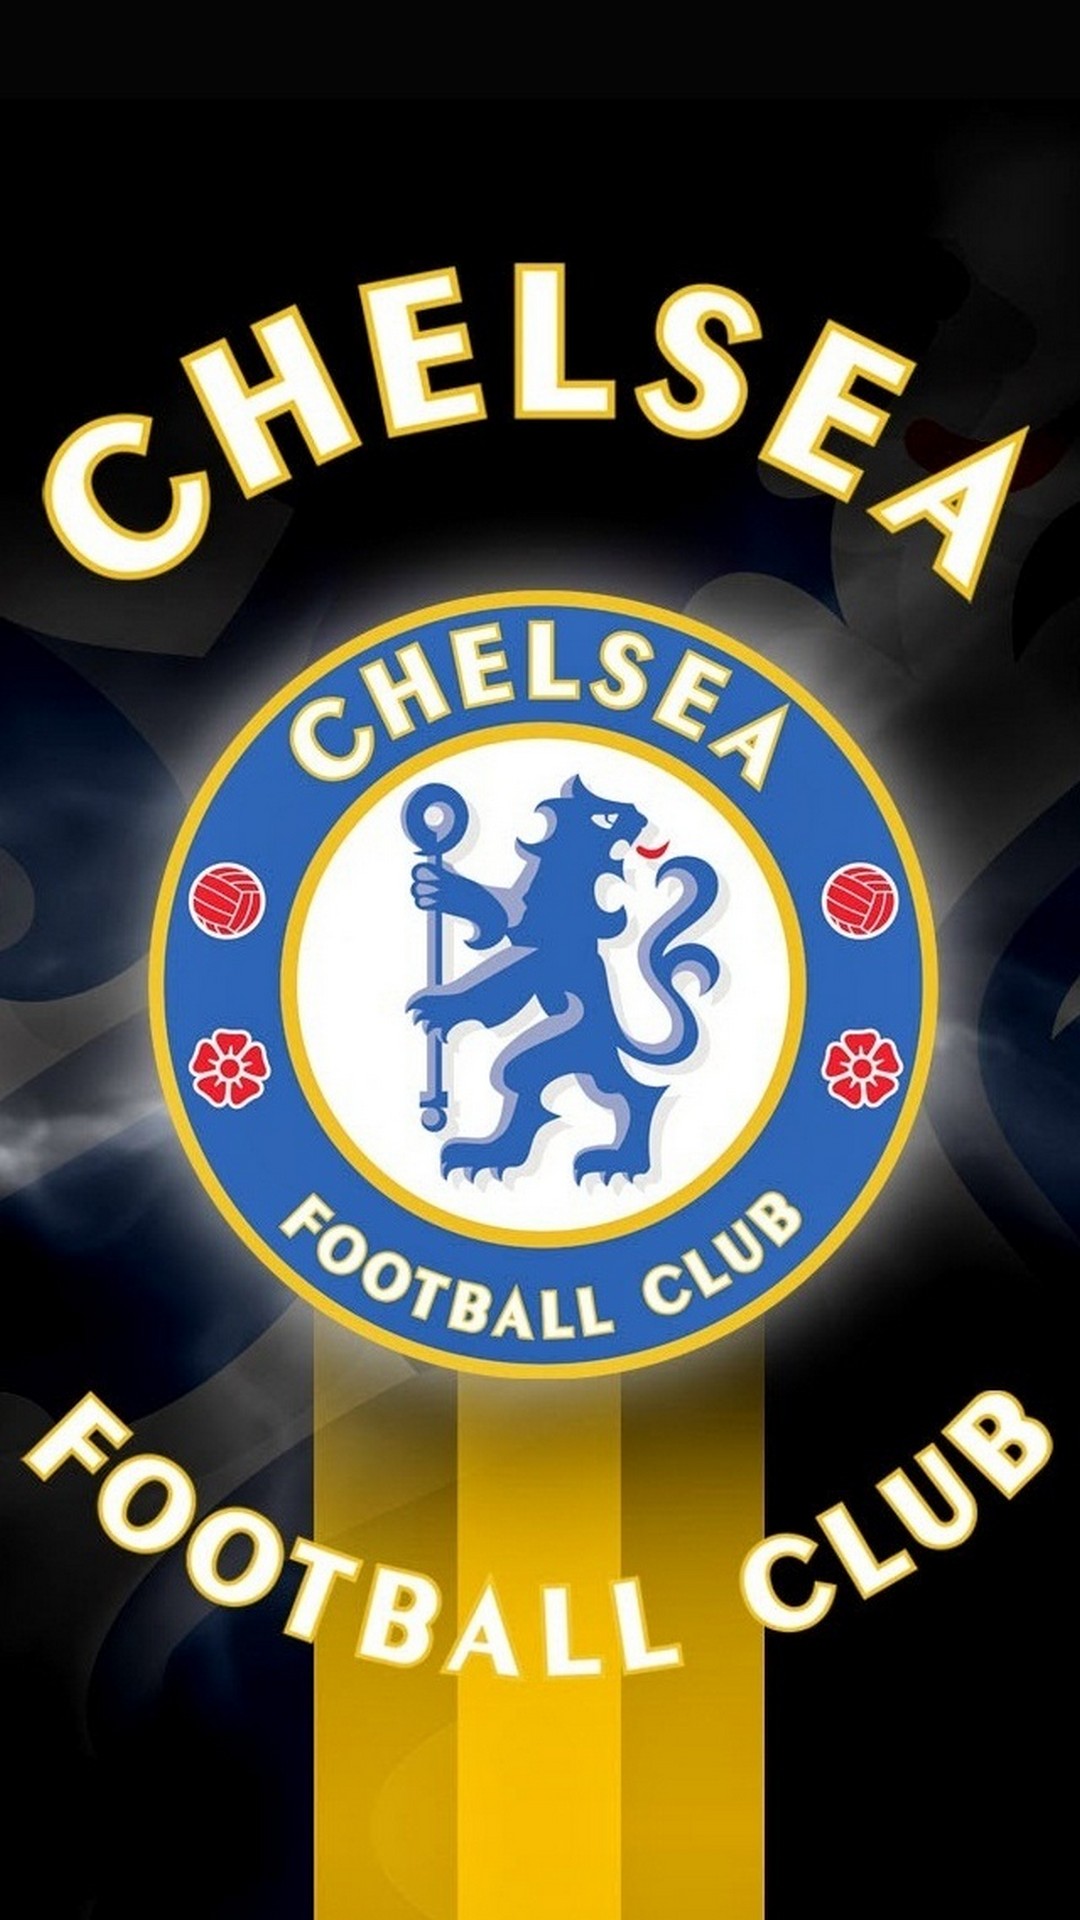 iPhone Wallpaper HD Chelsea Champions League With Resolution 1080X1920 pixel. You can make this wallpaper for your Mac or Windows Desktop Background, iPhone, Android or Tablet and another Smartphone device for free